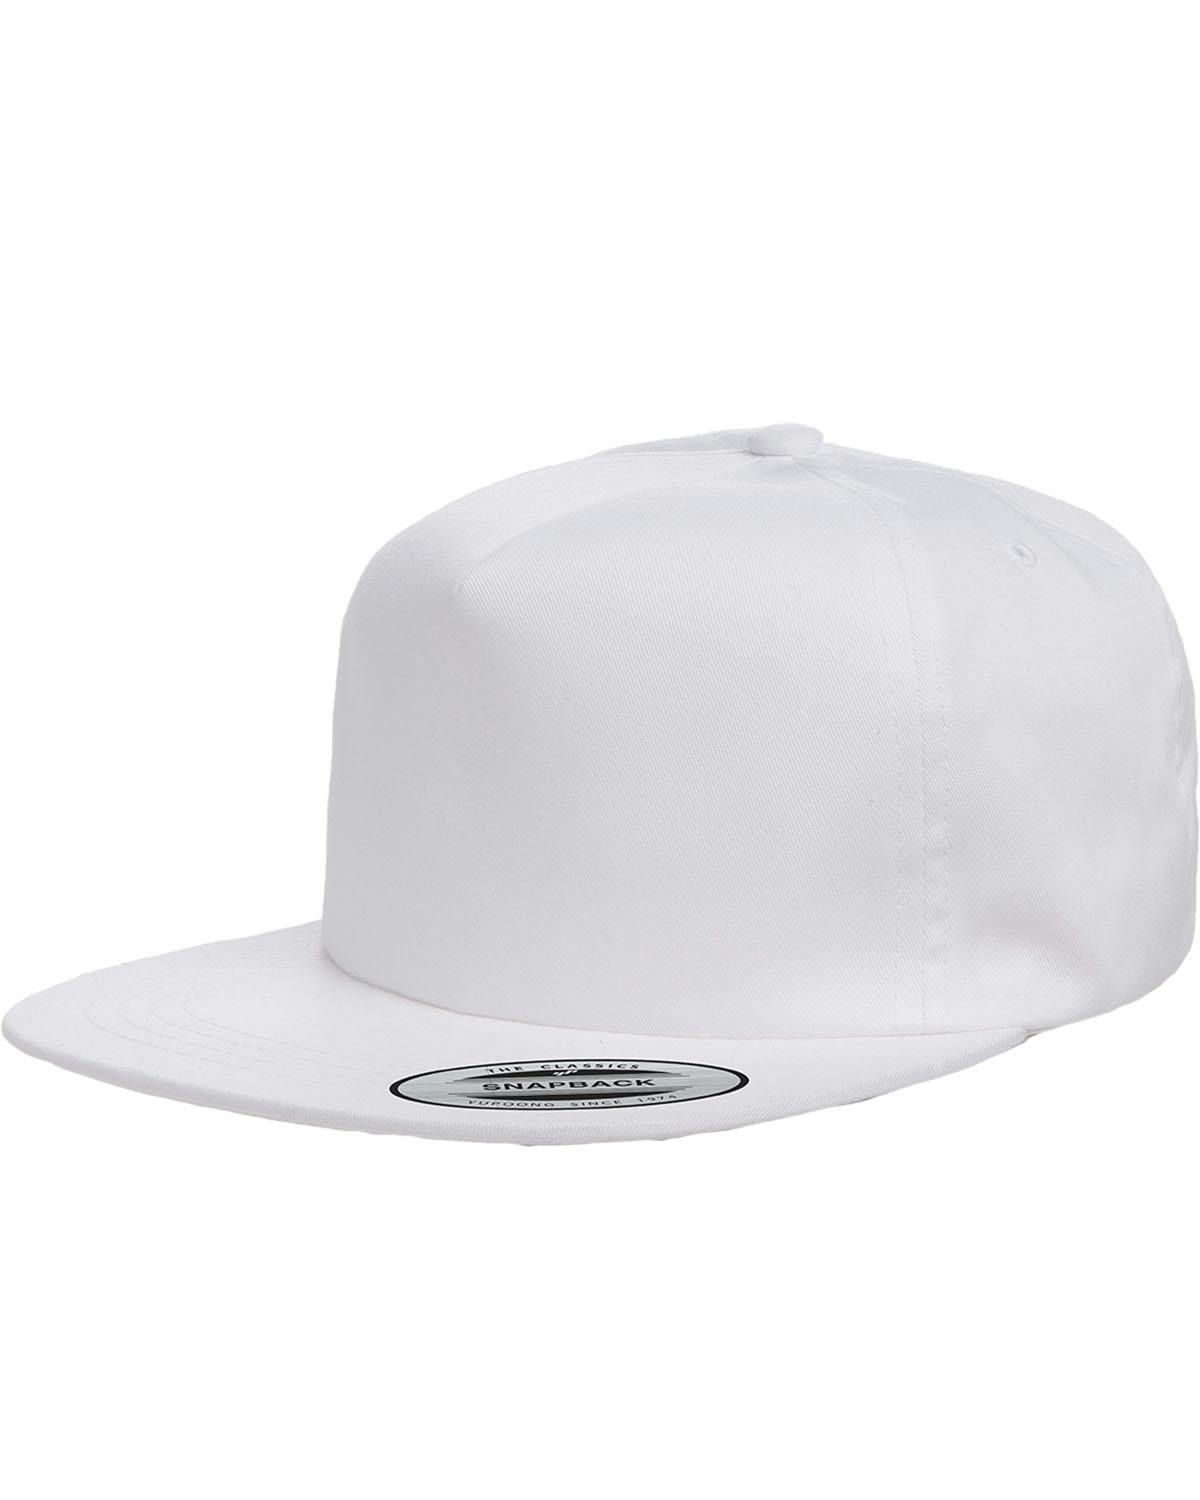 Image for Adult Unstructured Snapback Cap